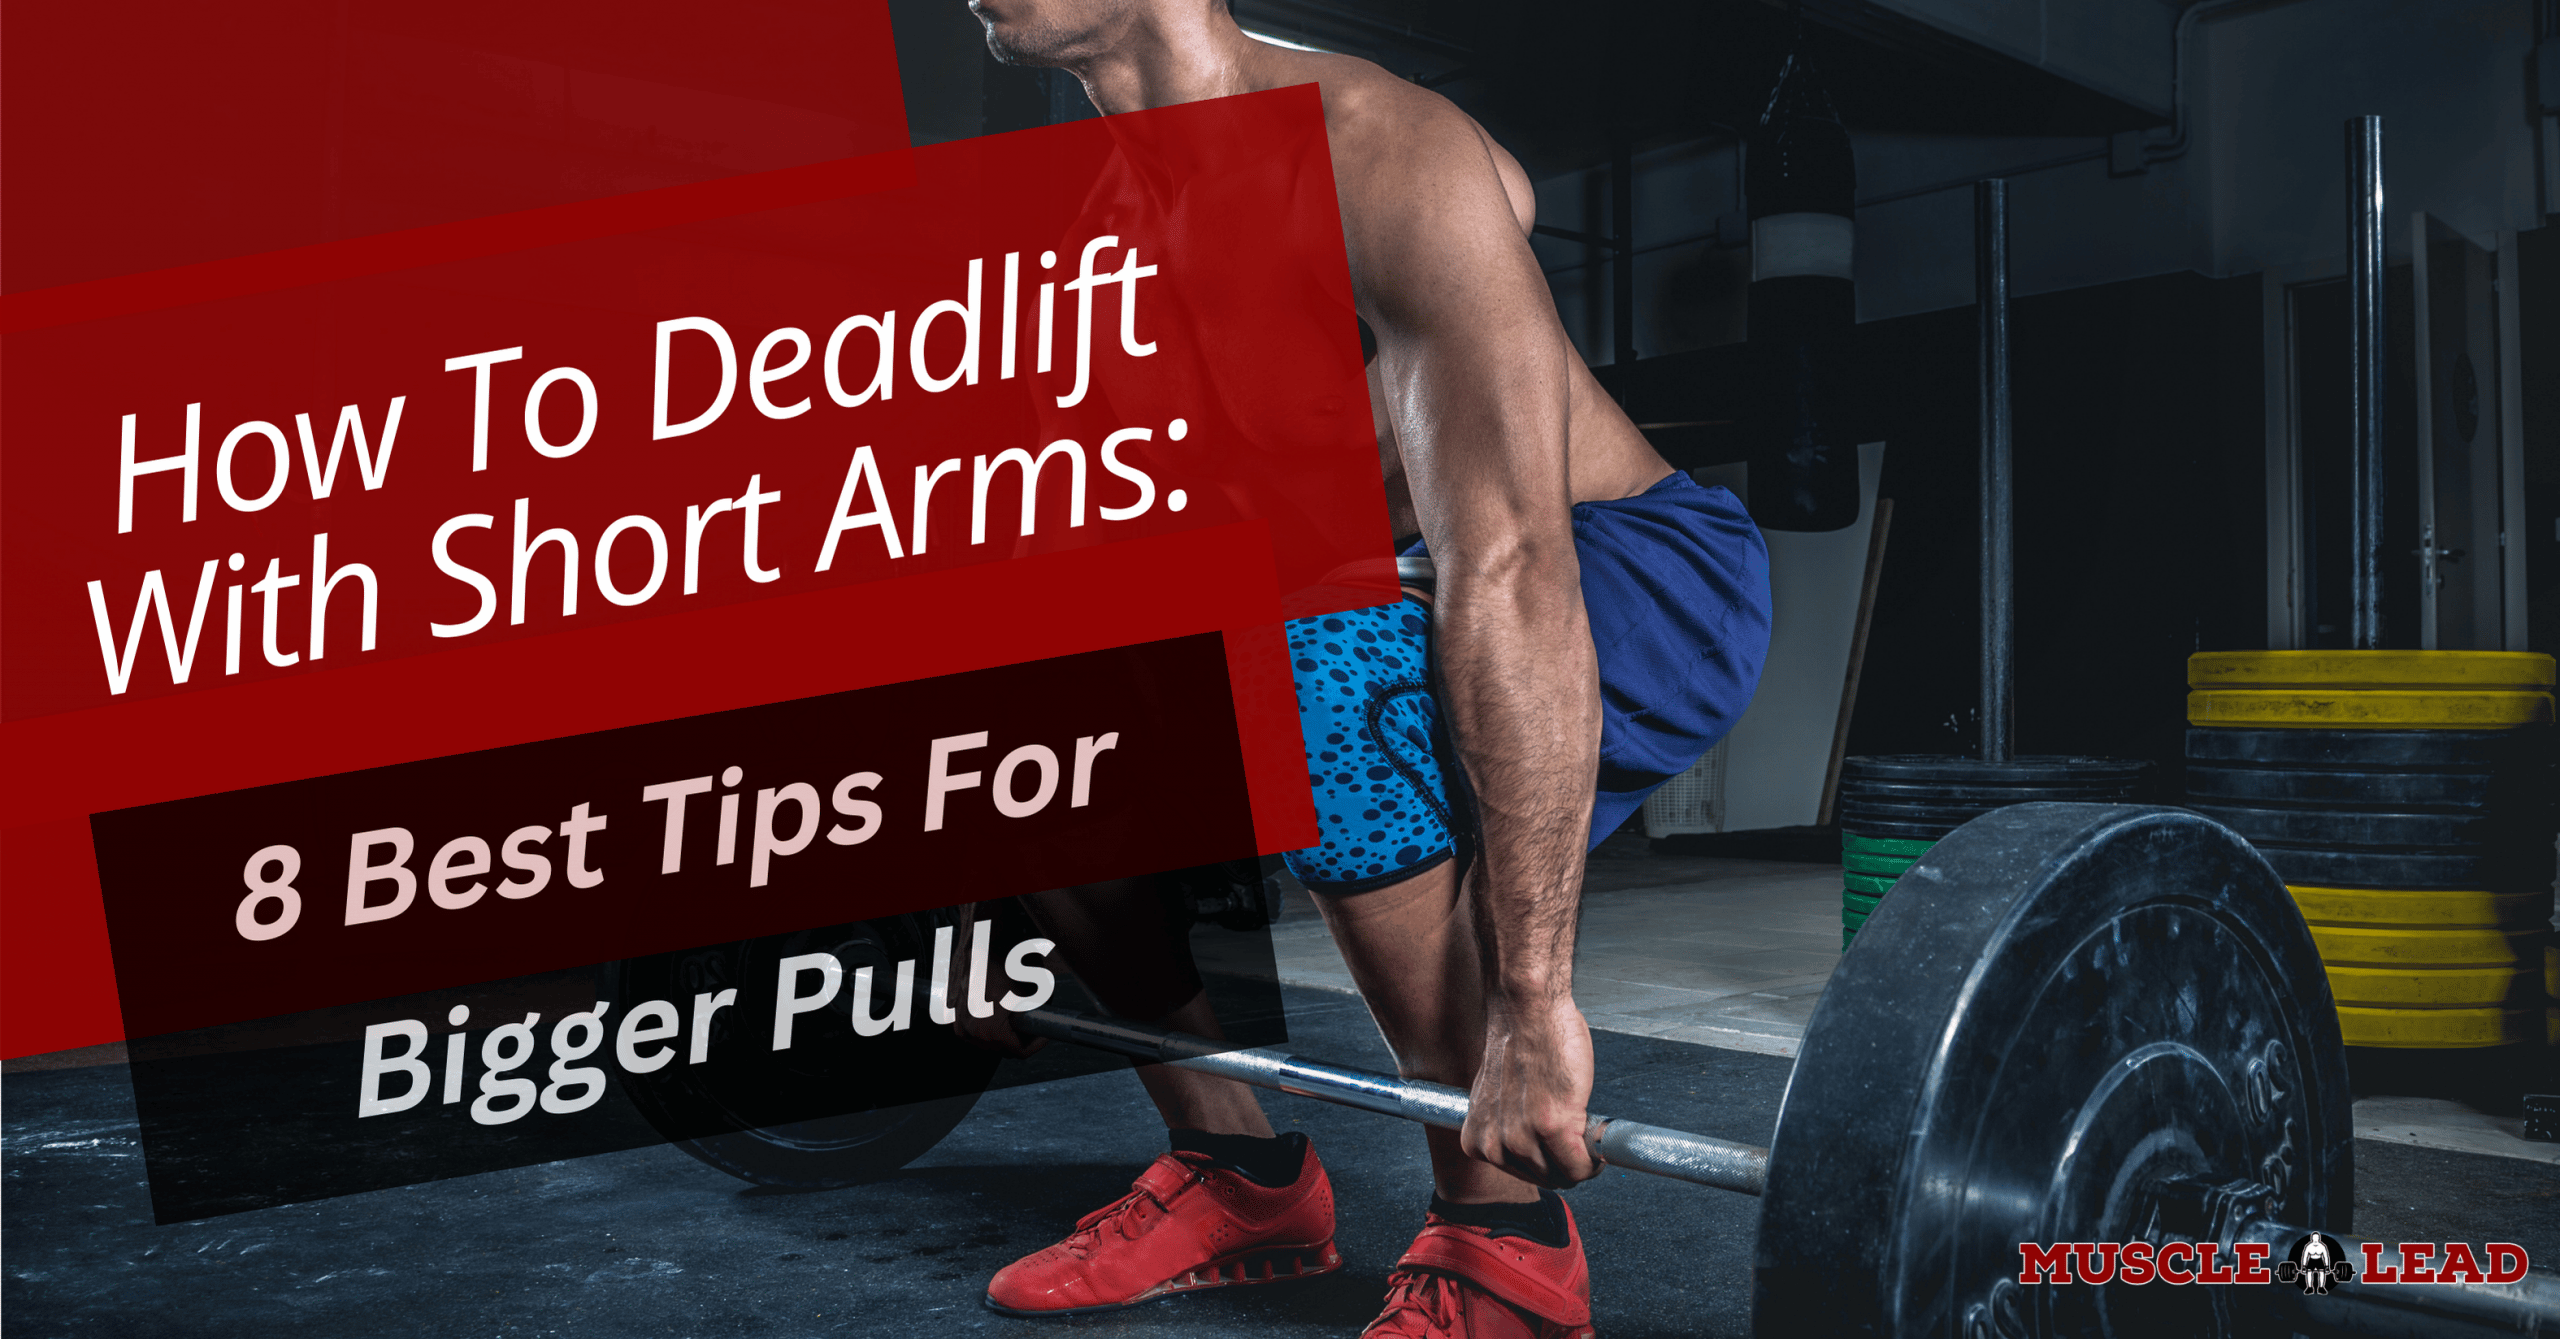 How To Deadlift With Short Arms 8 Best Tips For Bigger Pulls